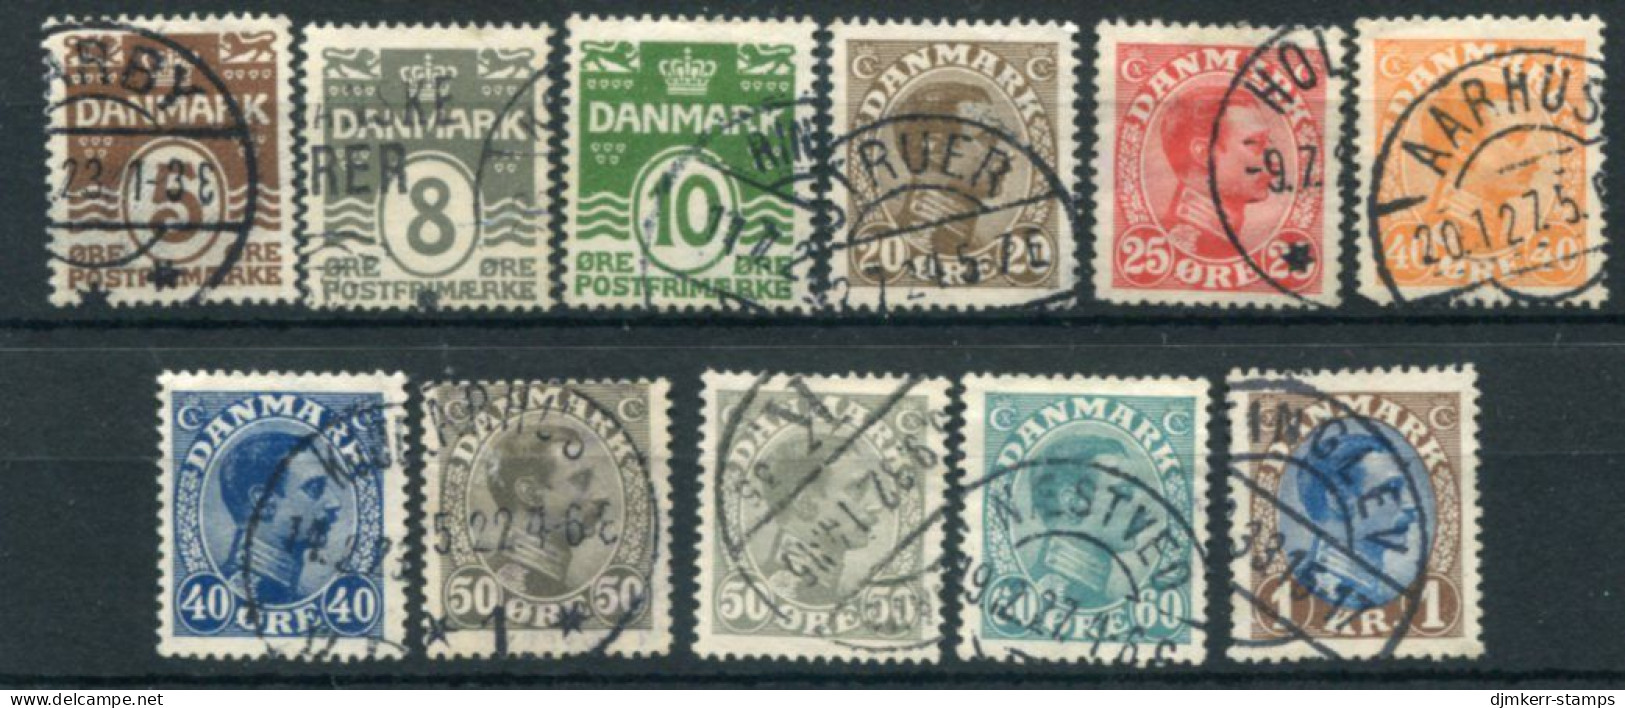 DENMARK 1921-22 Numeral And King Christian X Definitives Used .  Michel 118-28 - Oblitérés